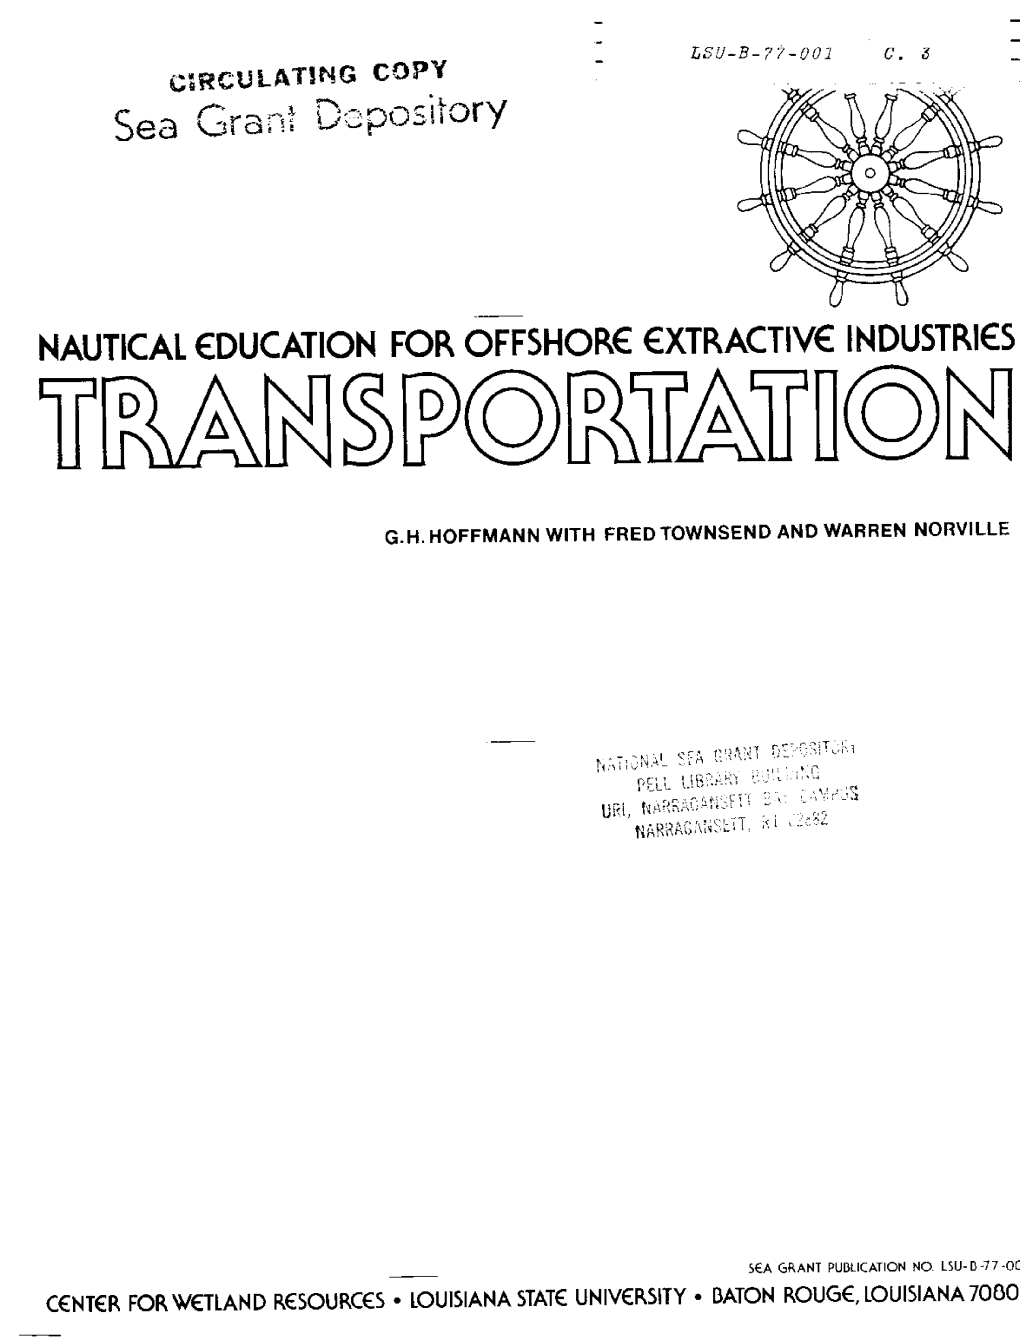 Nautical Education for Offshore Cxtractivc